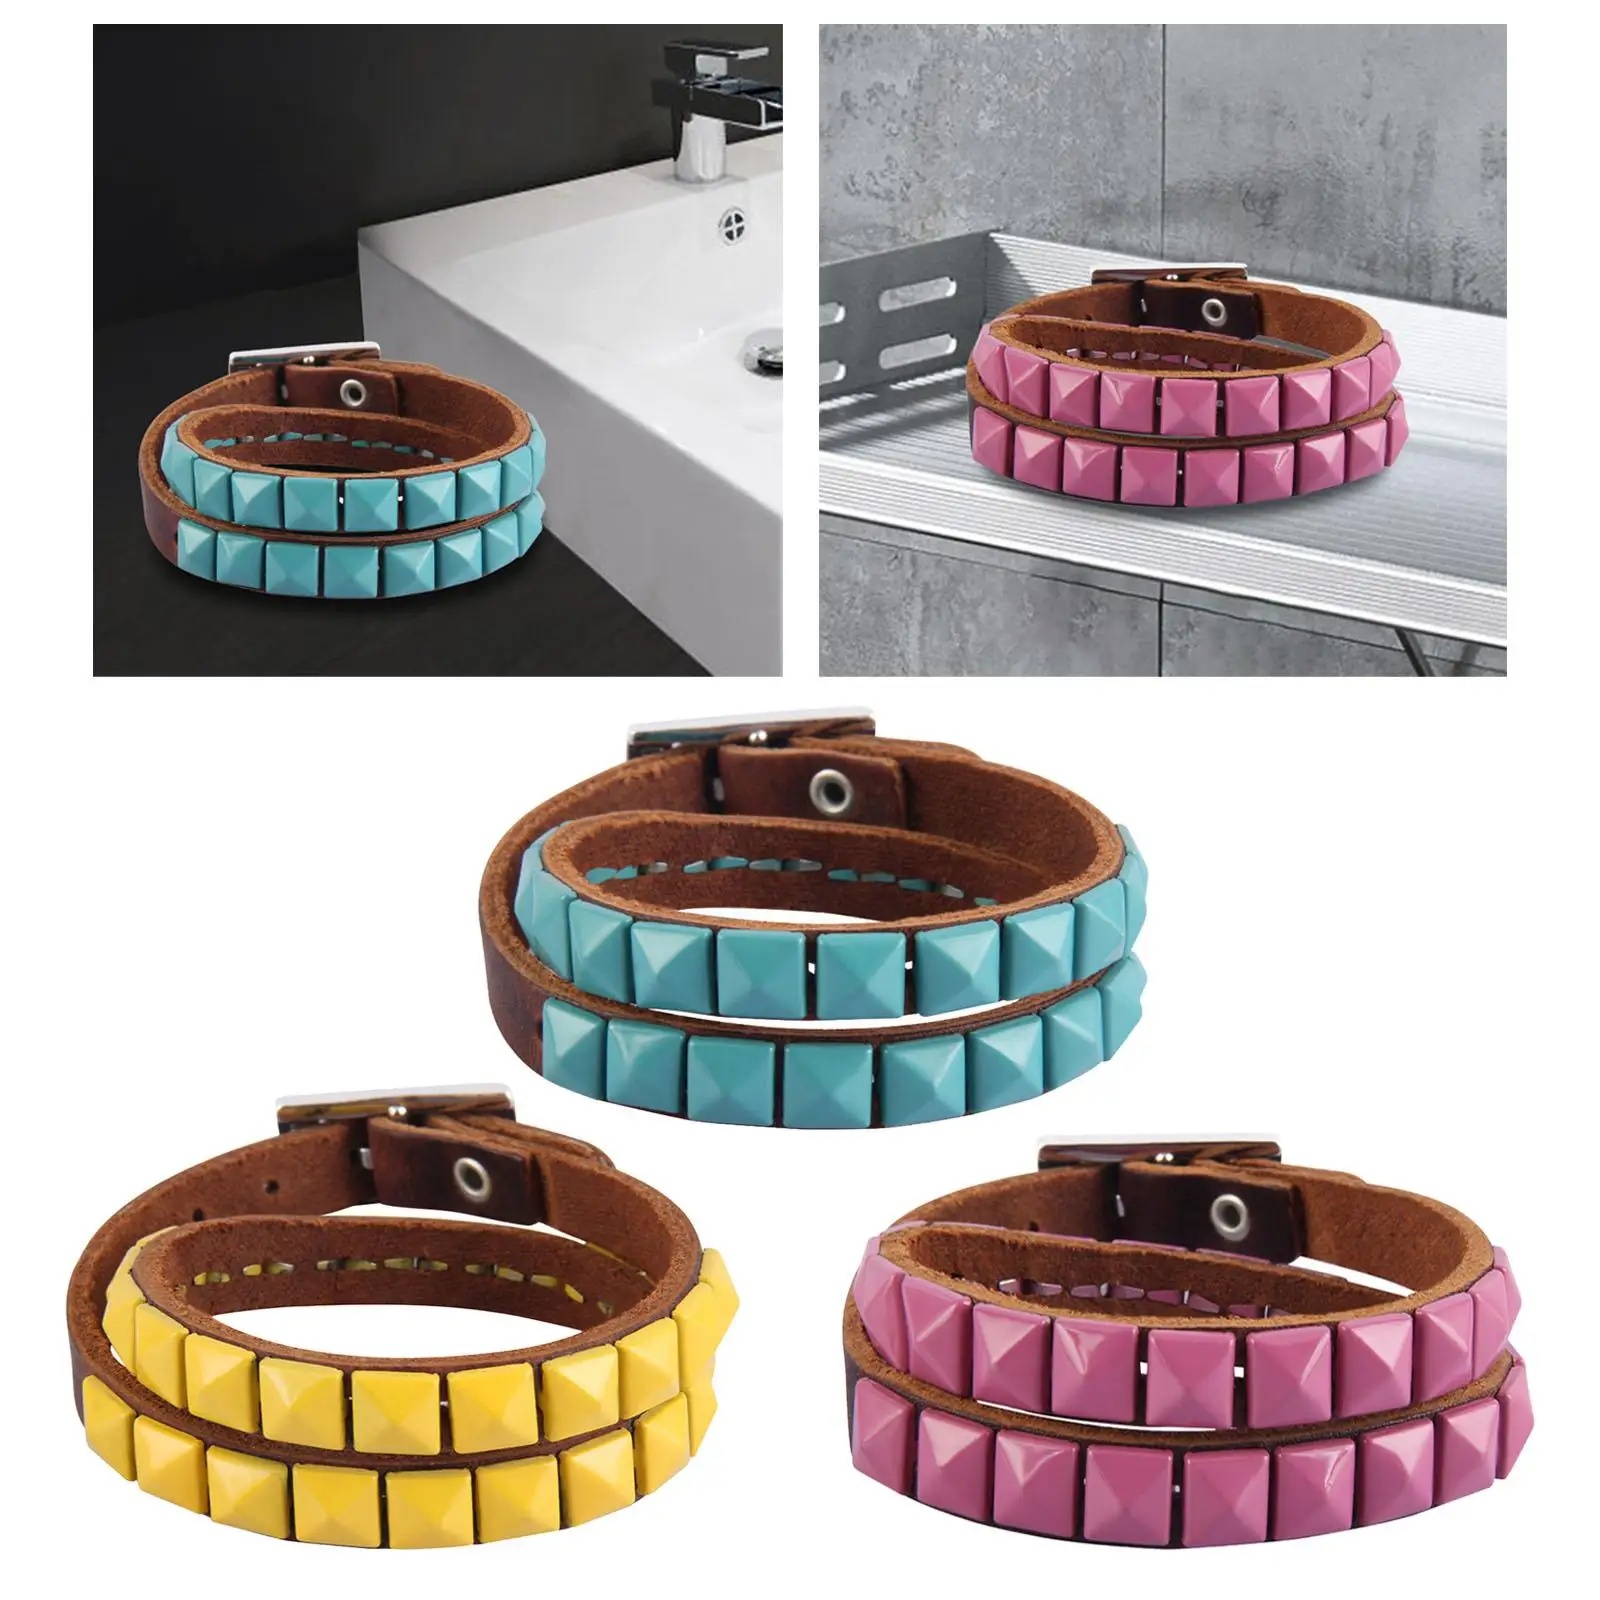 Gothic Punk Rock Studded Bracelet Wide Thick Adjustable PU Leather Wristband Jewelry for Party Favors Men Women Halloween